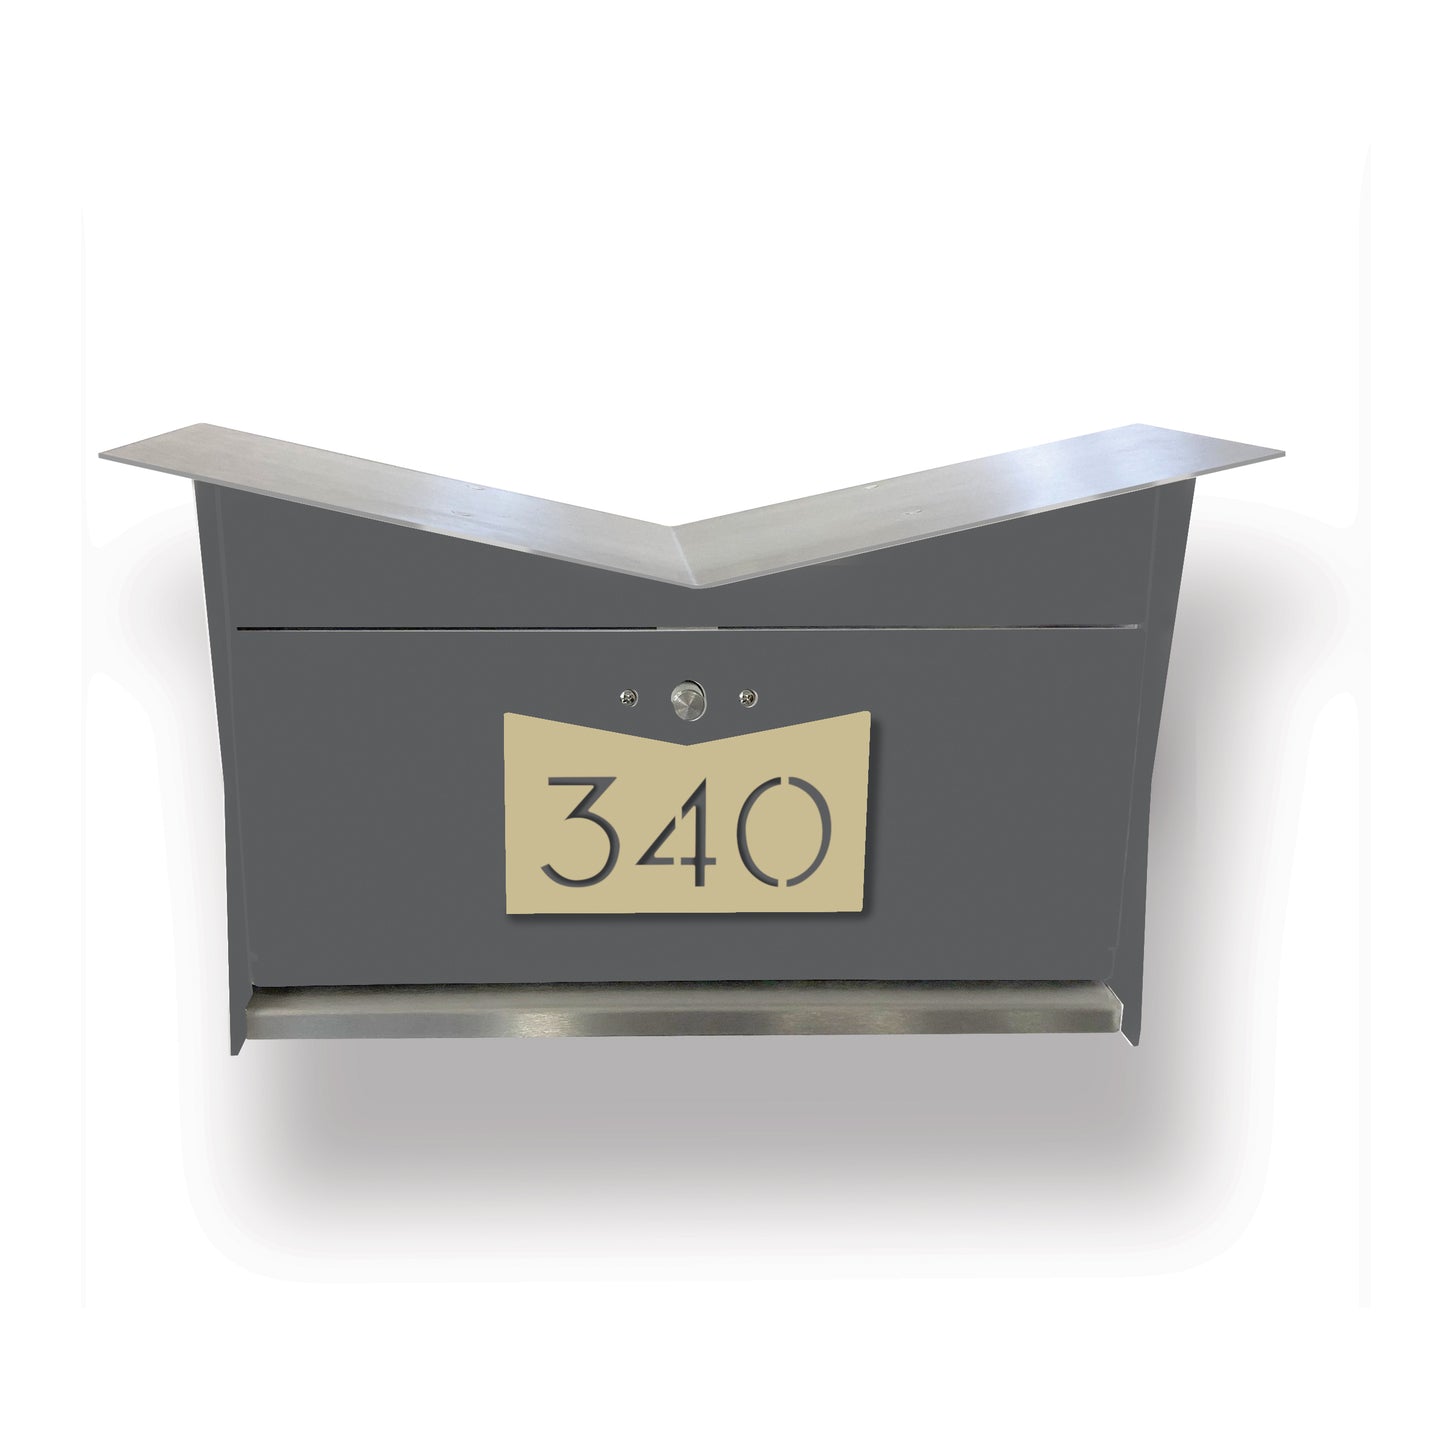 Wall Mount Mailbox | ButterFly Box in designer gray and mid-century gold